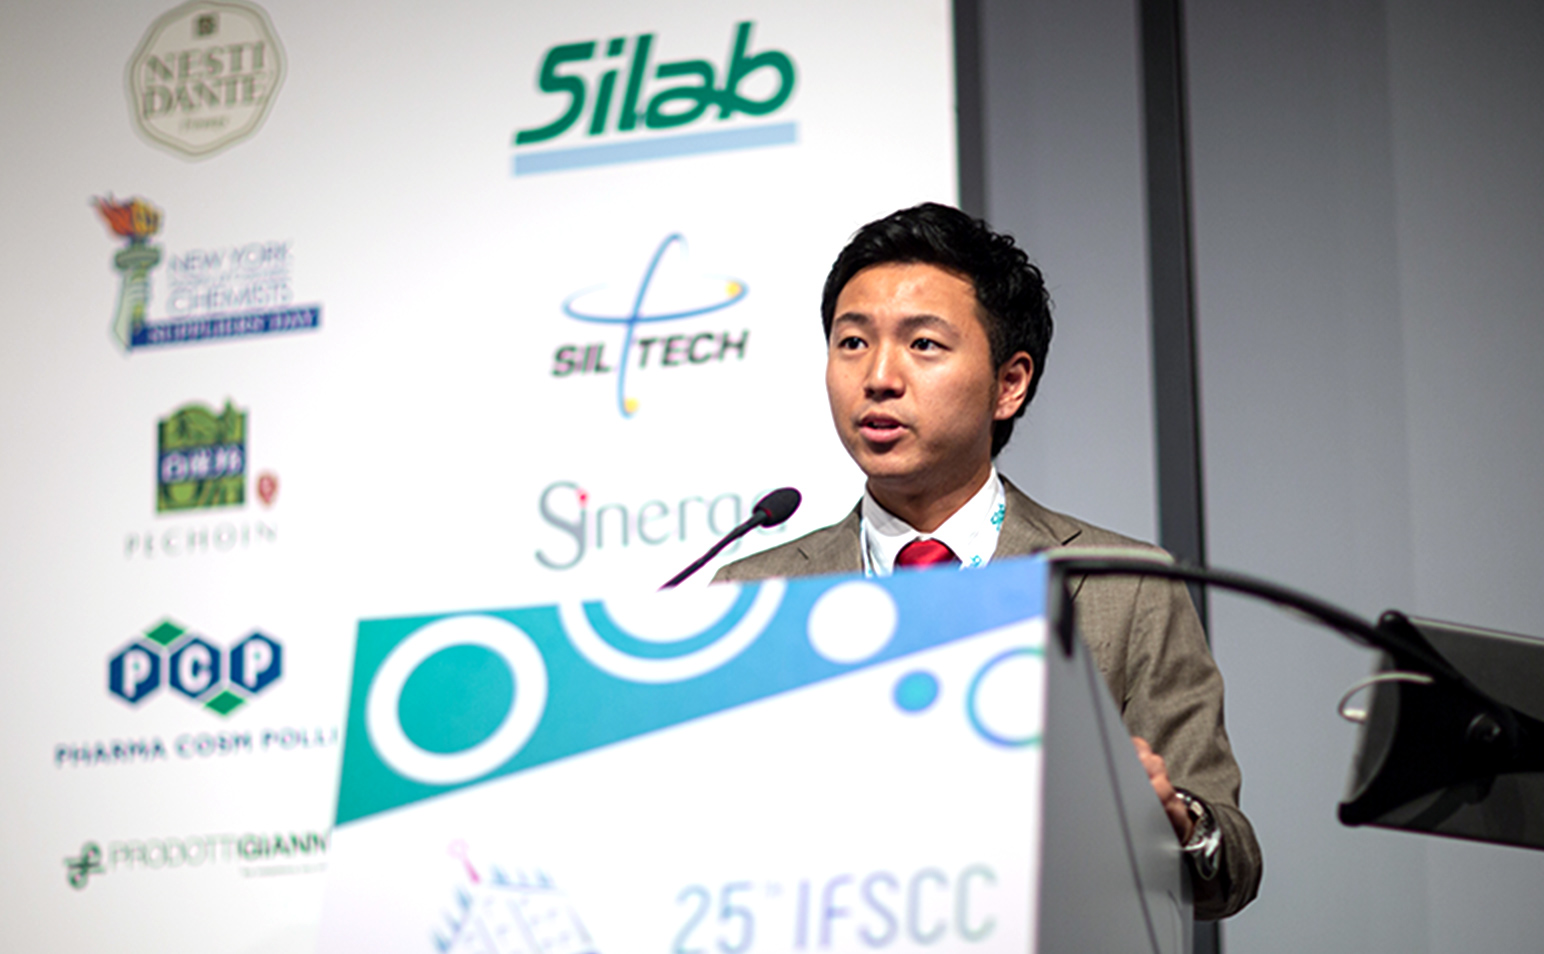 Kazuki Takagaki, the research presenter who won the top award in the Podium Presentation category at the IFSCC (International Federation of Societies of Cosmetic Chemists) Conference 2019 in Milan